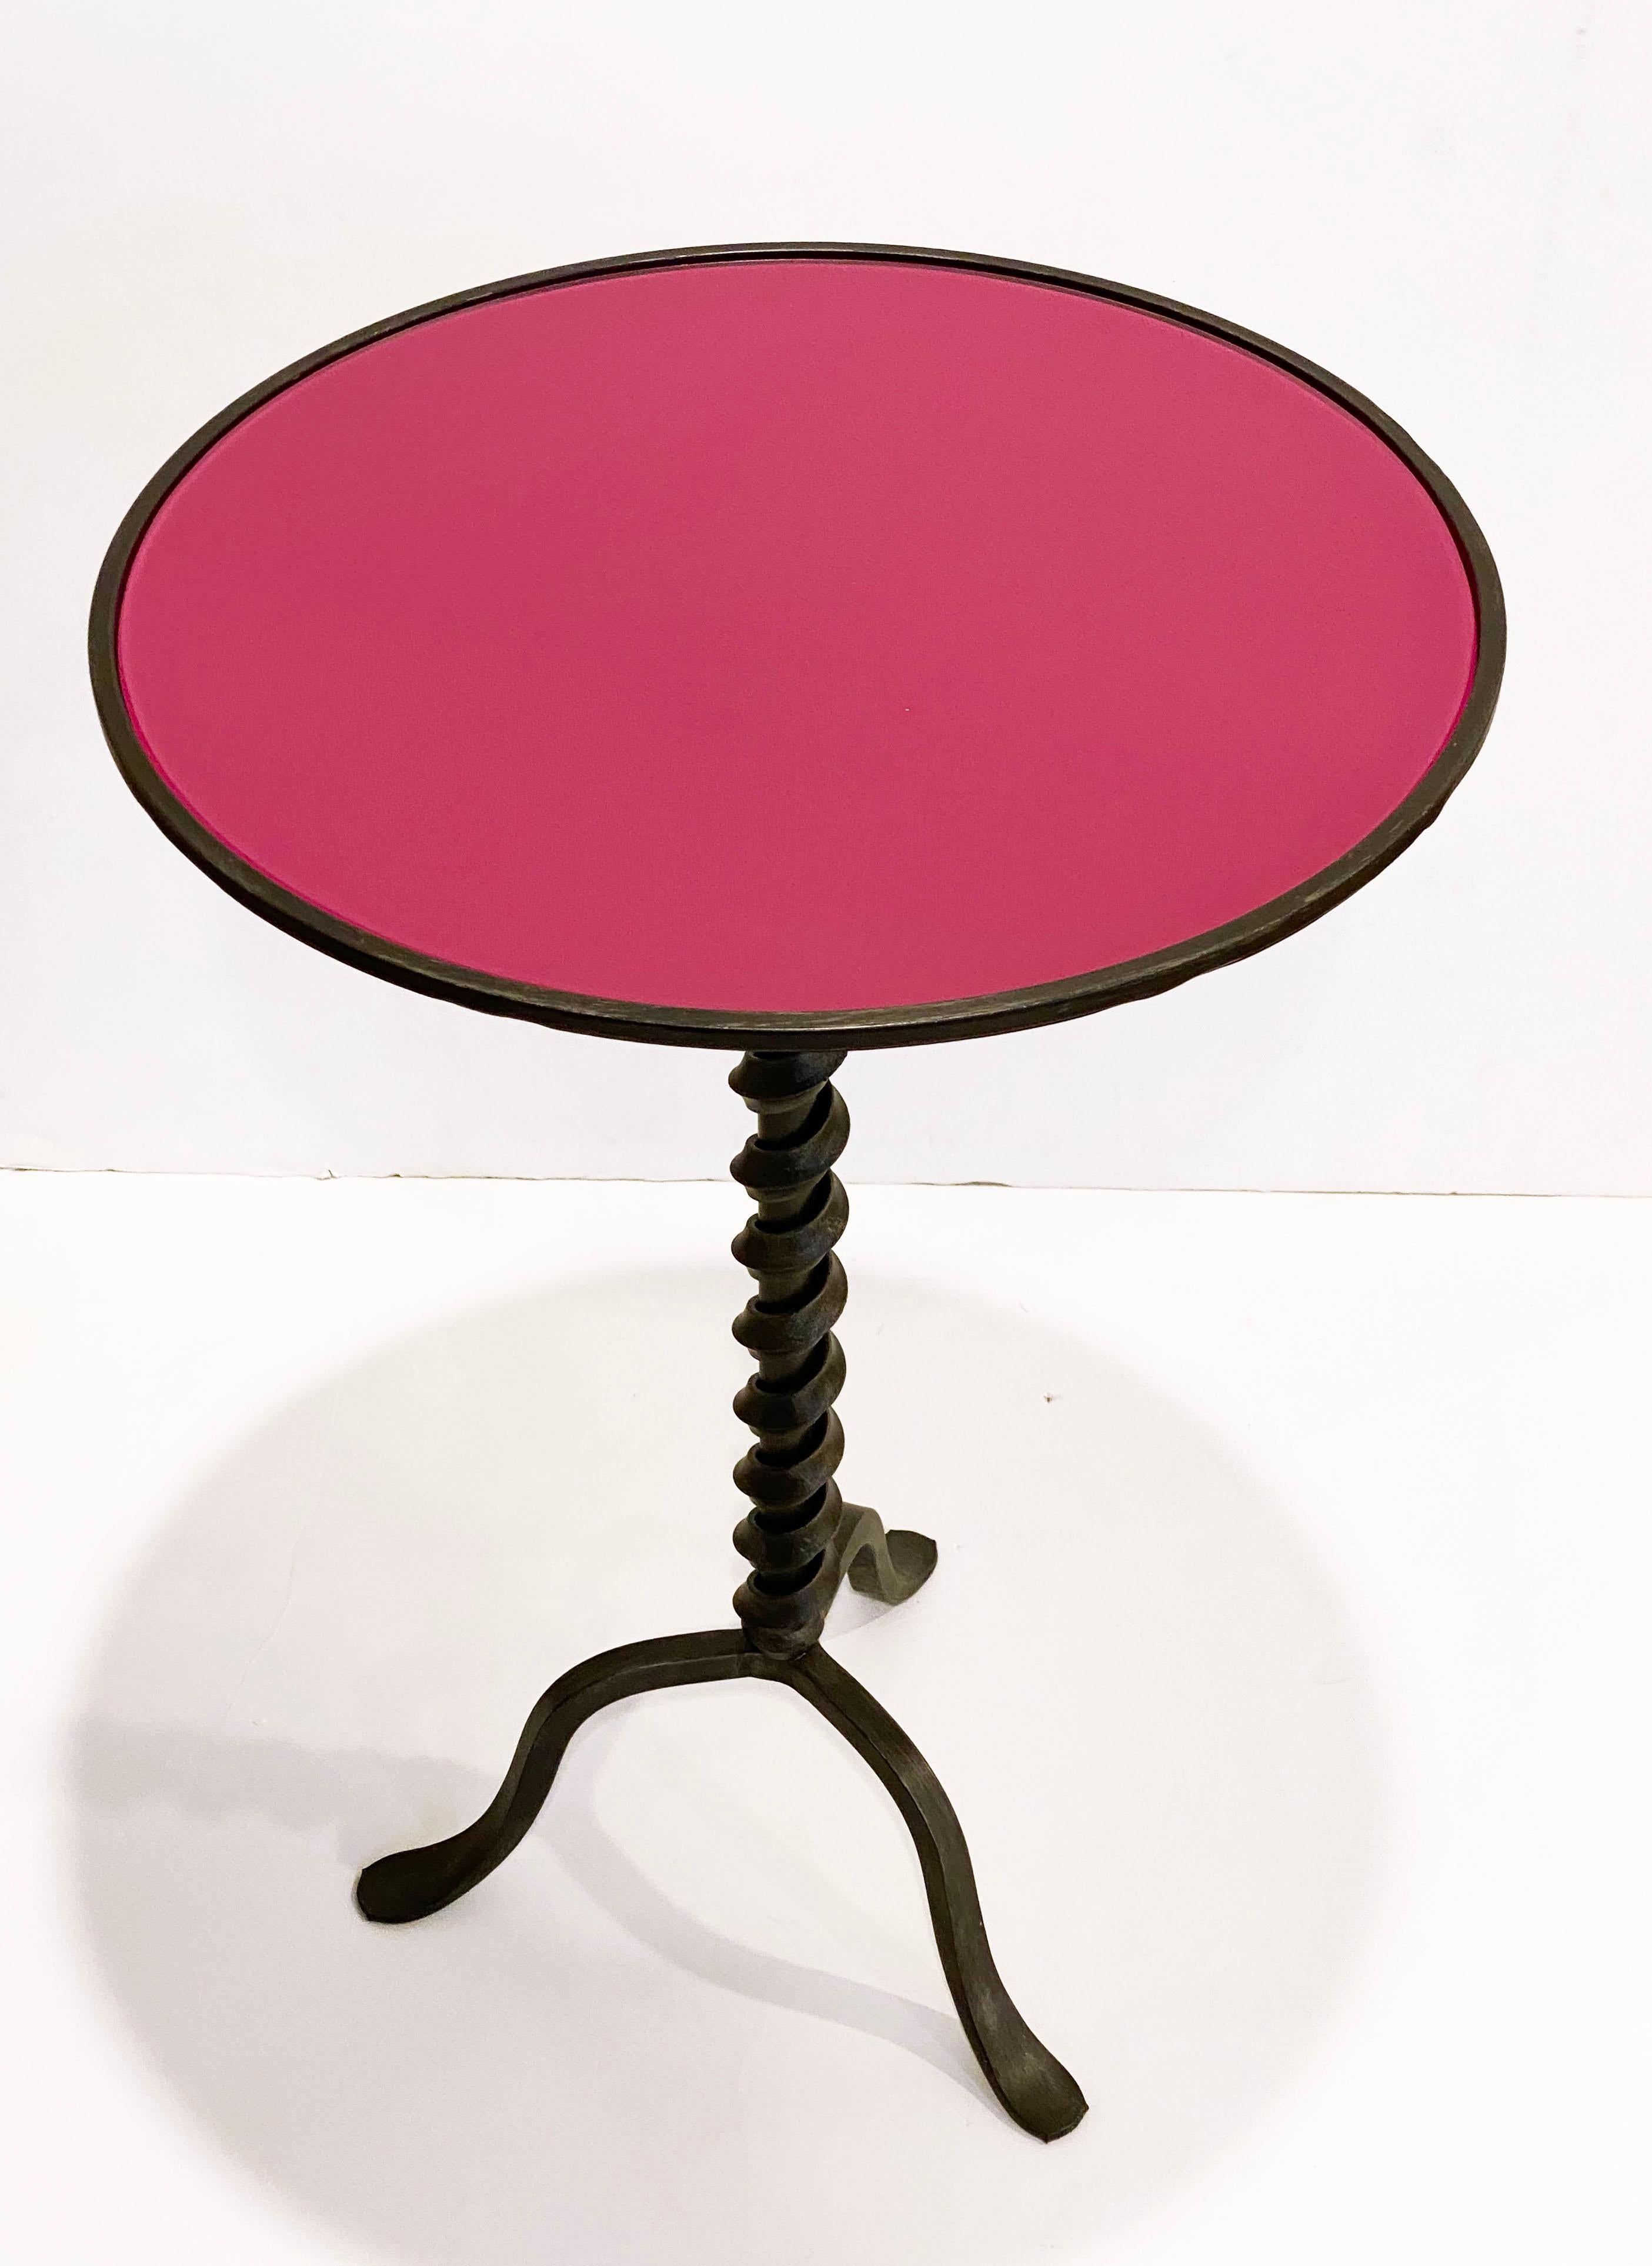 Add fun with color to your environment, outdoor and indoor! This contemporary cast iron side table, entirely handcrafted in Italy, will certainly delight with a glass top customizable in any color of your choice. This organic modern tripod piece